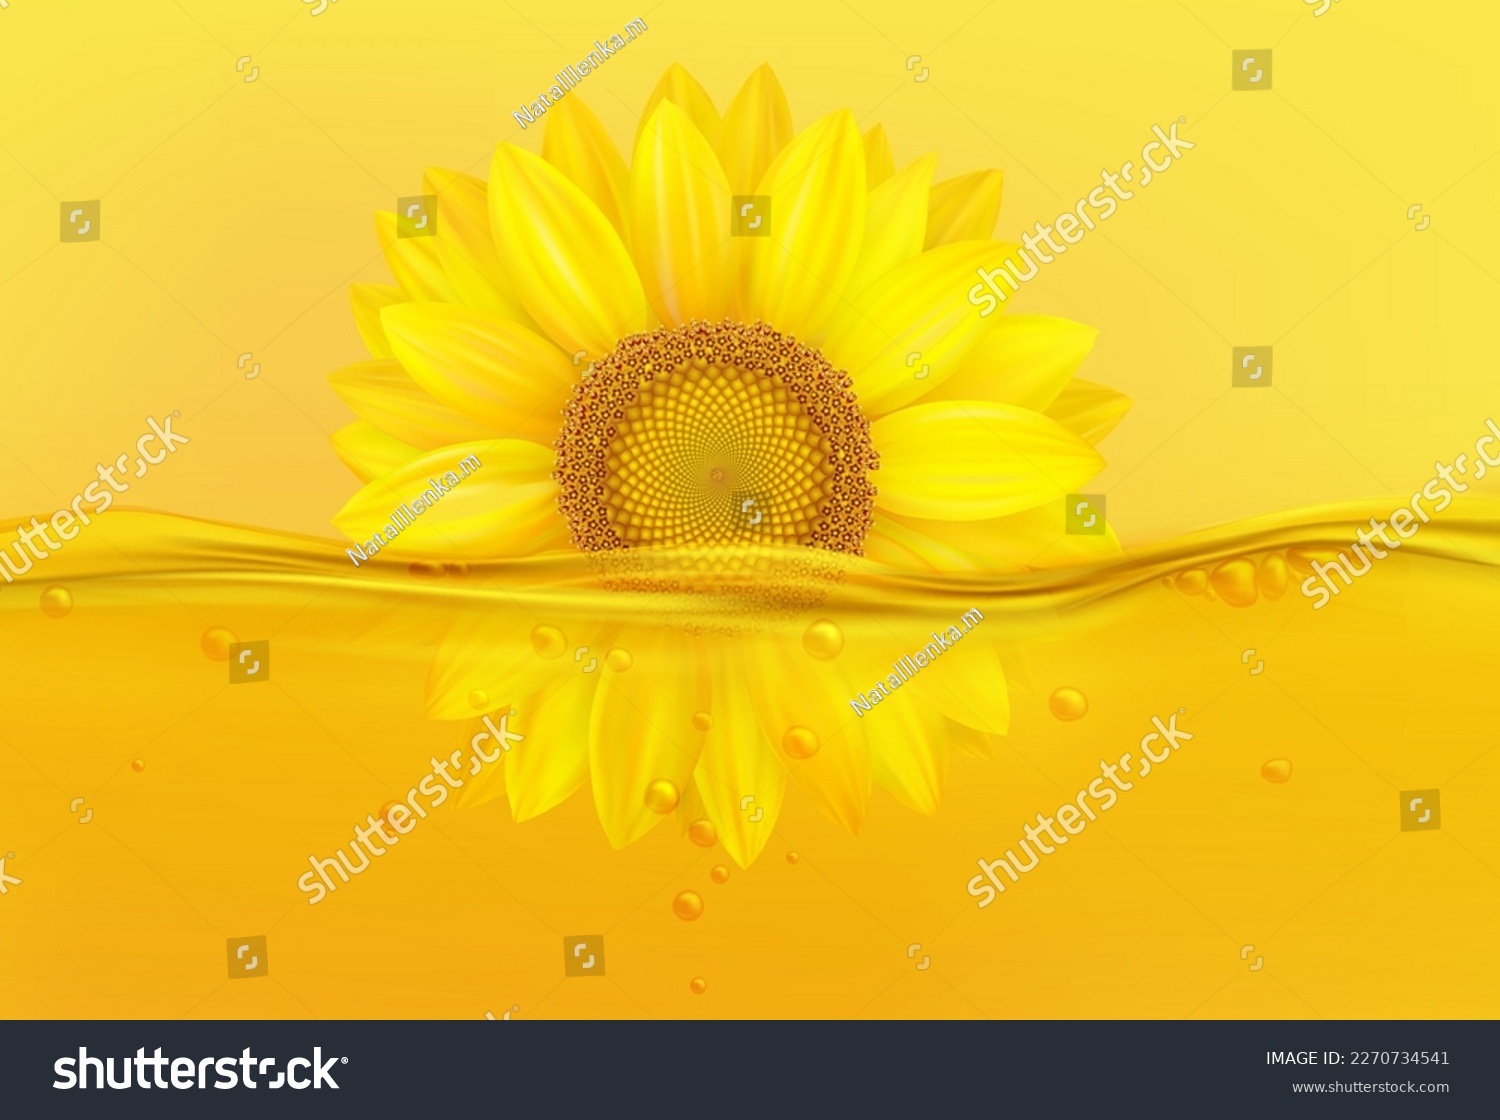 SVG of 3d sunflower oil, natural flower in liquid. Realistic agriculture plant for cook or oiling, gold natural food objects, supermarket posters and products labels. Vector realistic neoteric background svg